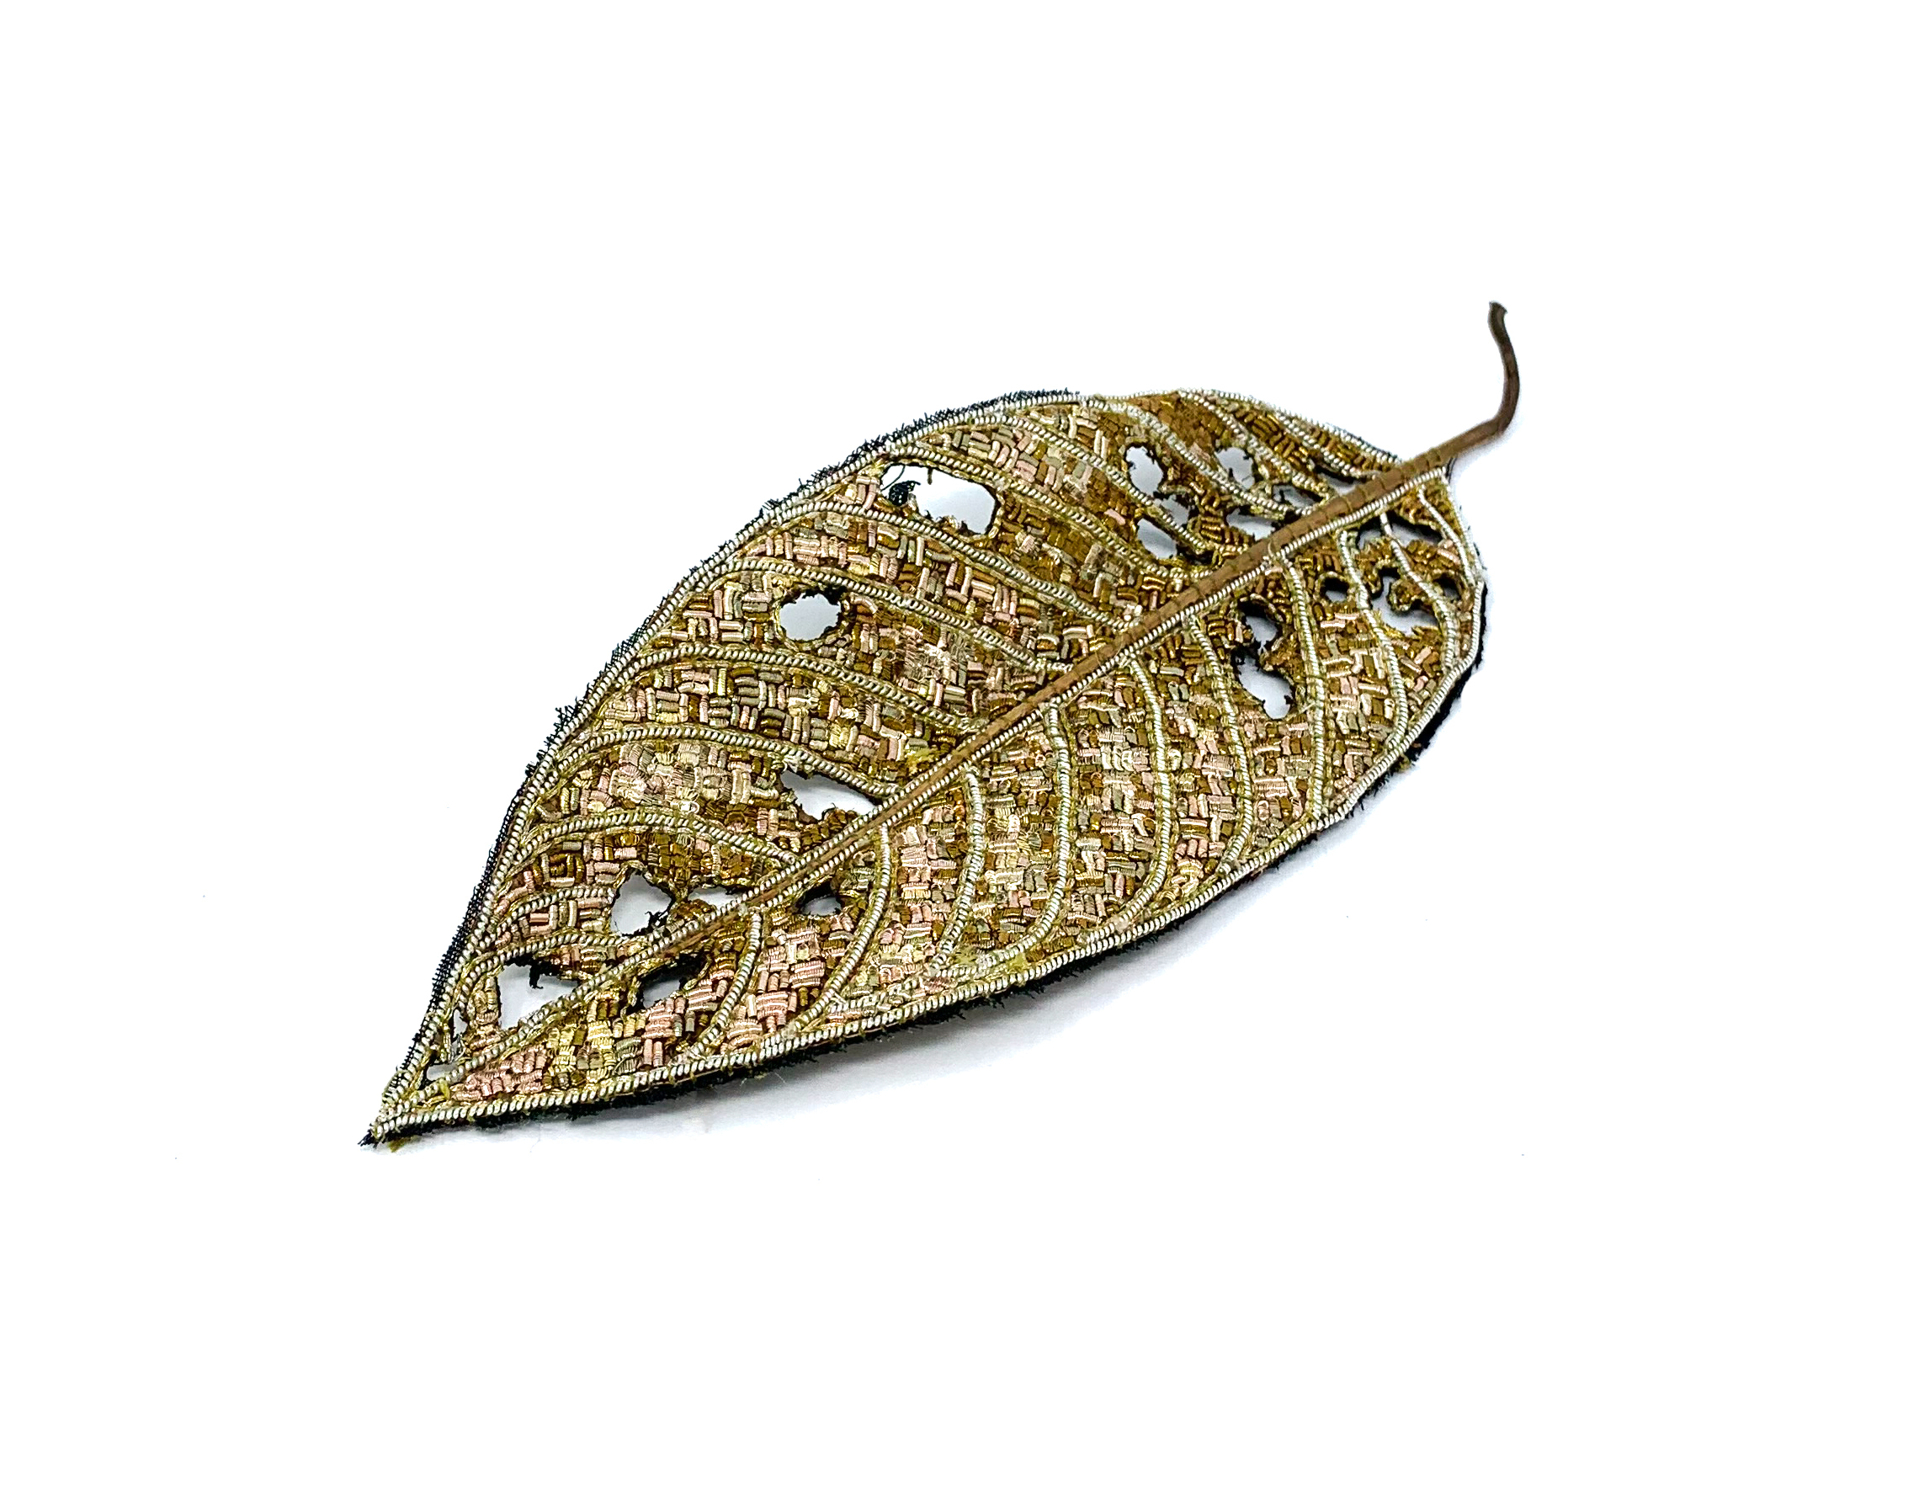 The Impermanence of Life: Acacia Leaf II by Tiao Nithakhong Somsanith